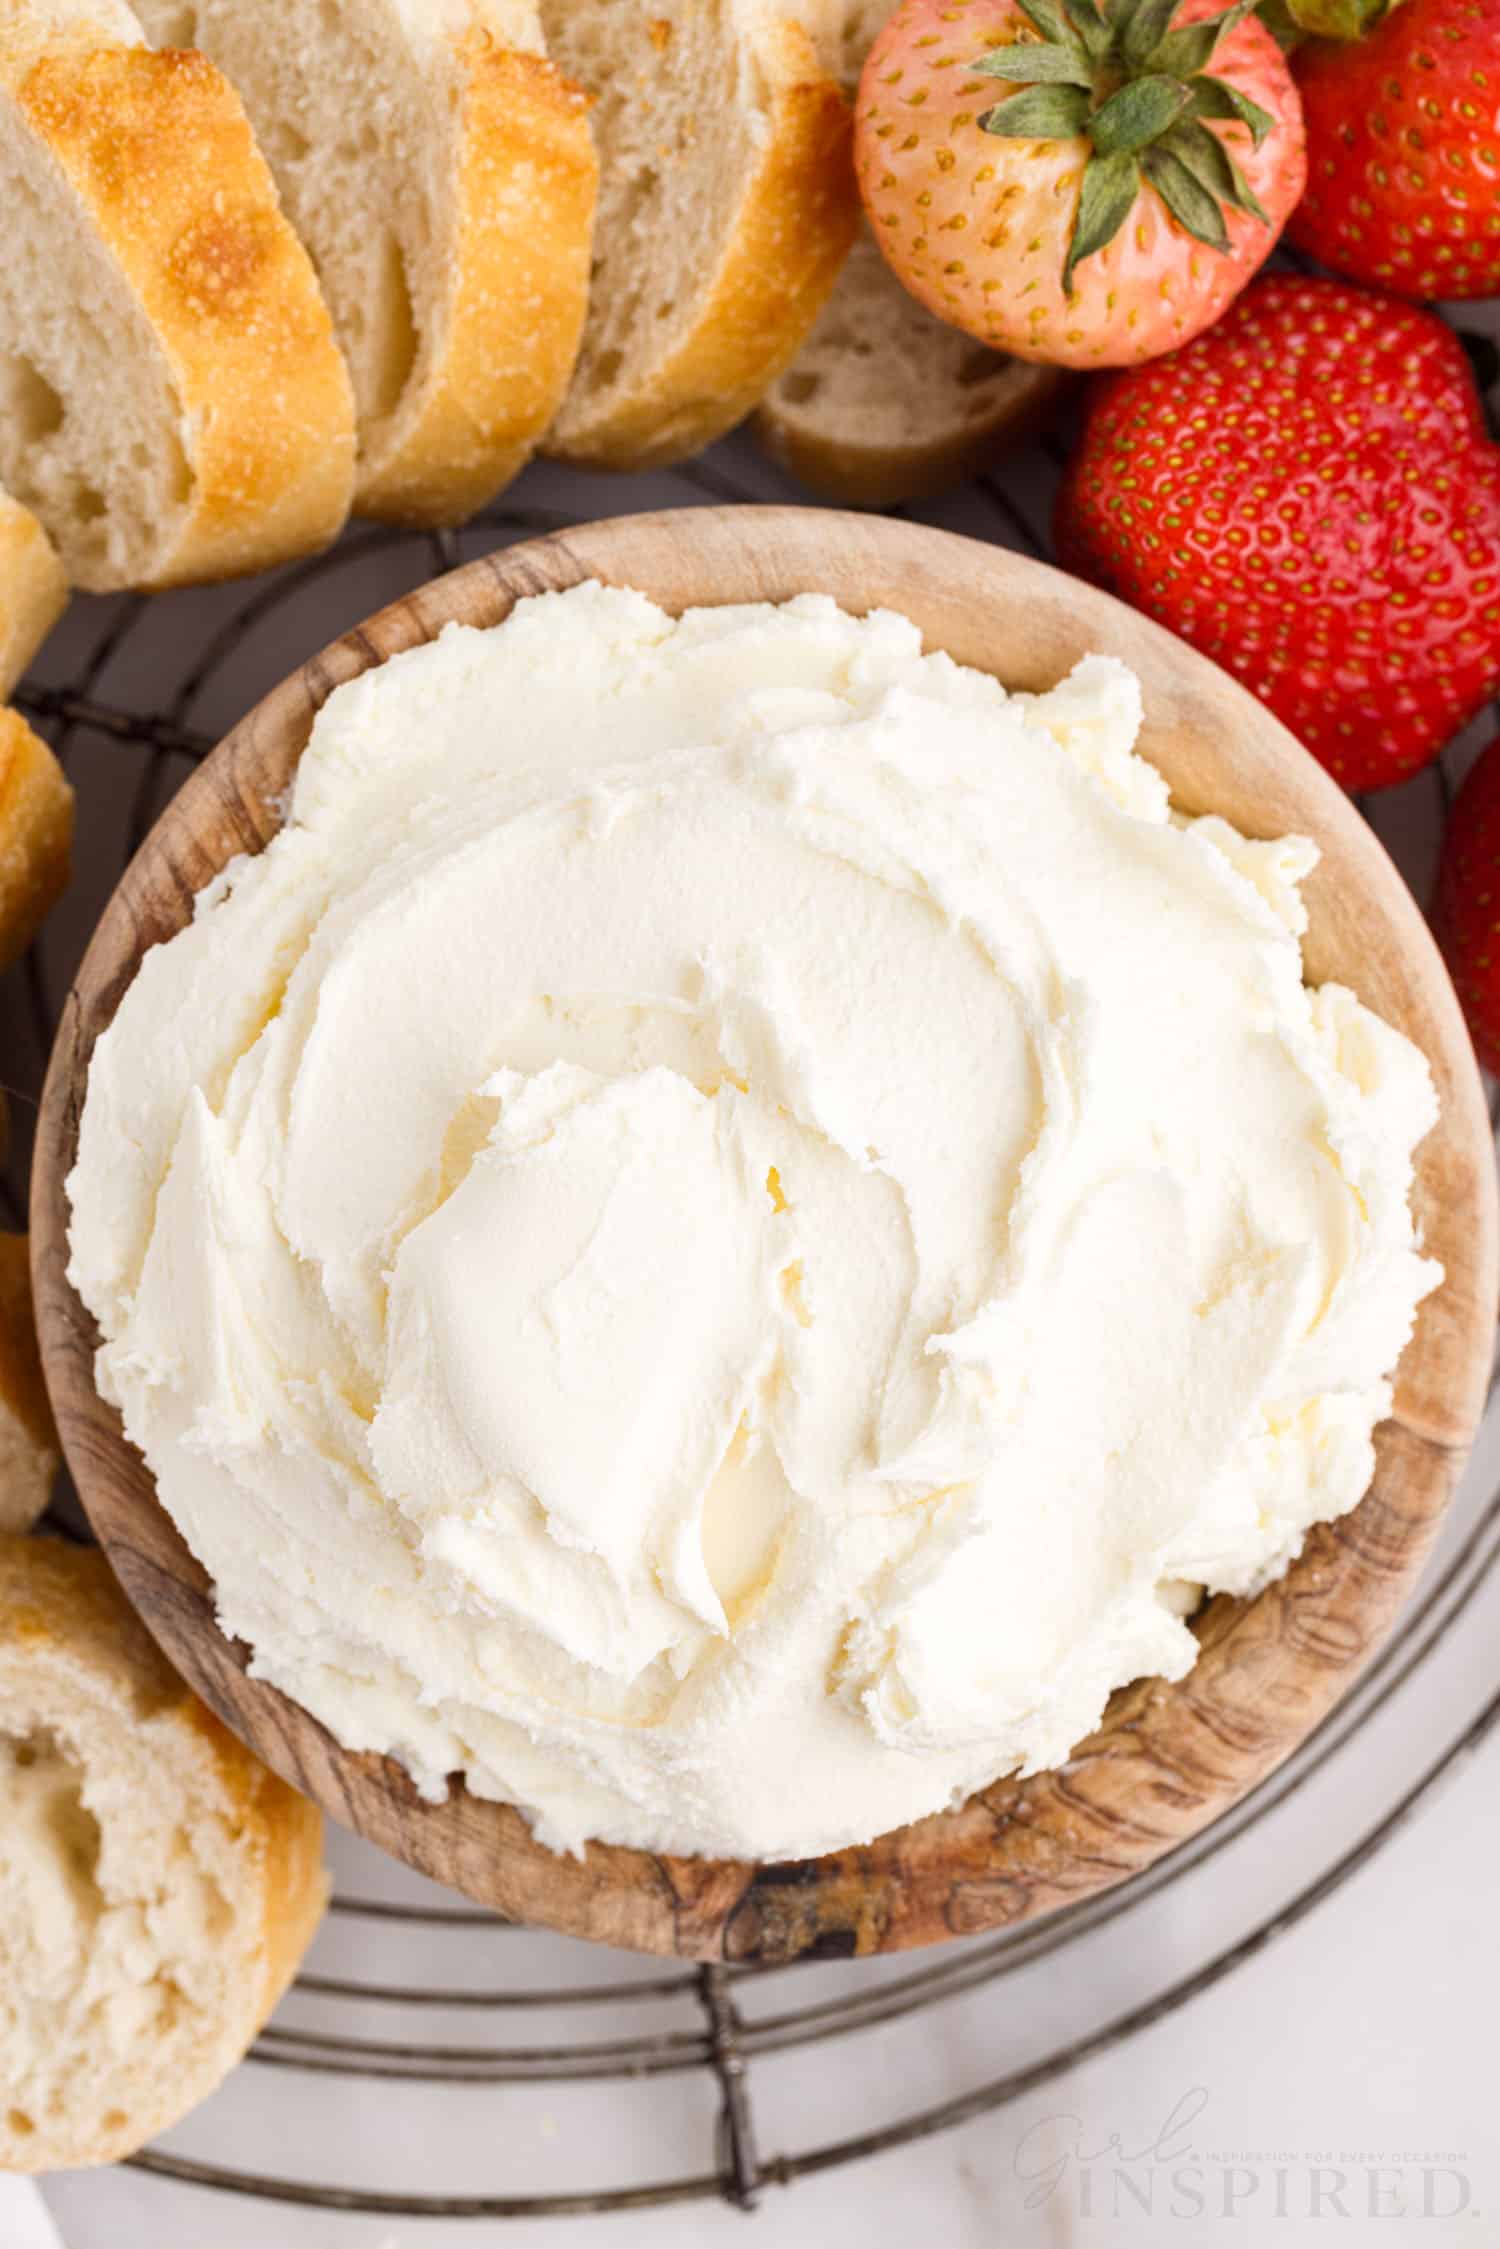 Overhead view of a dish of Mascarpone Cheese next to sliced bread and strawberries.